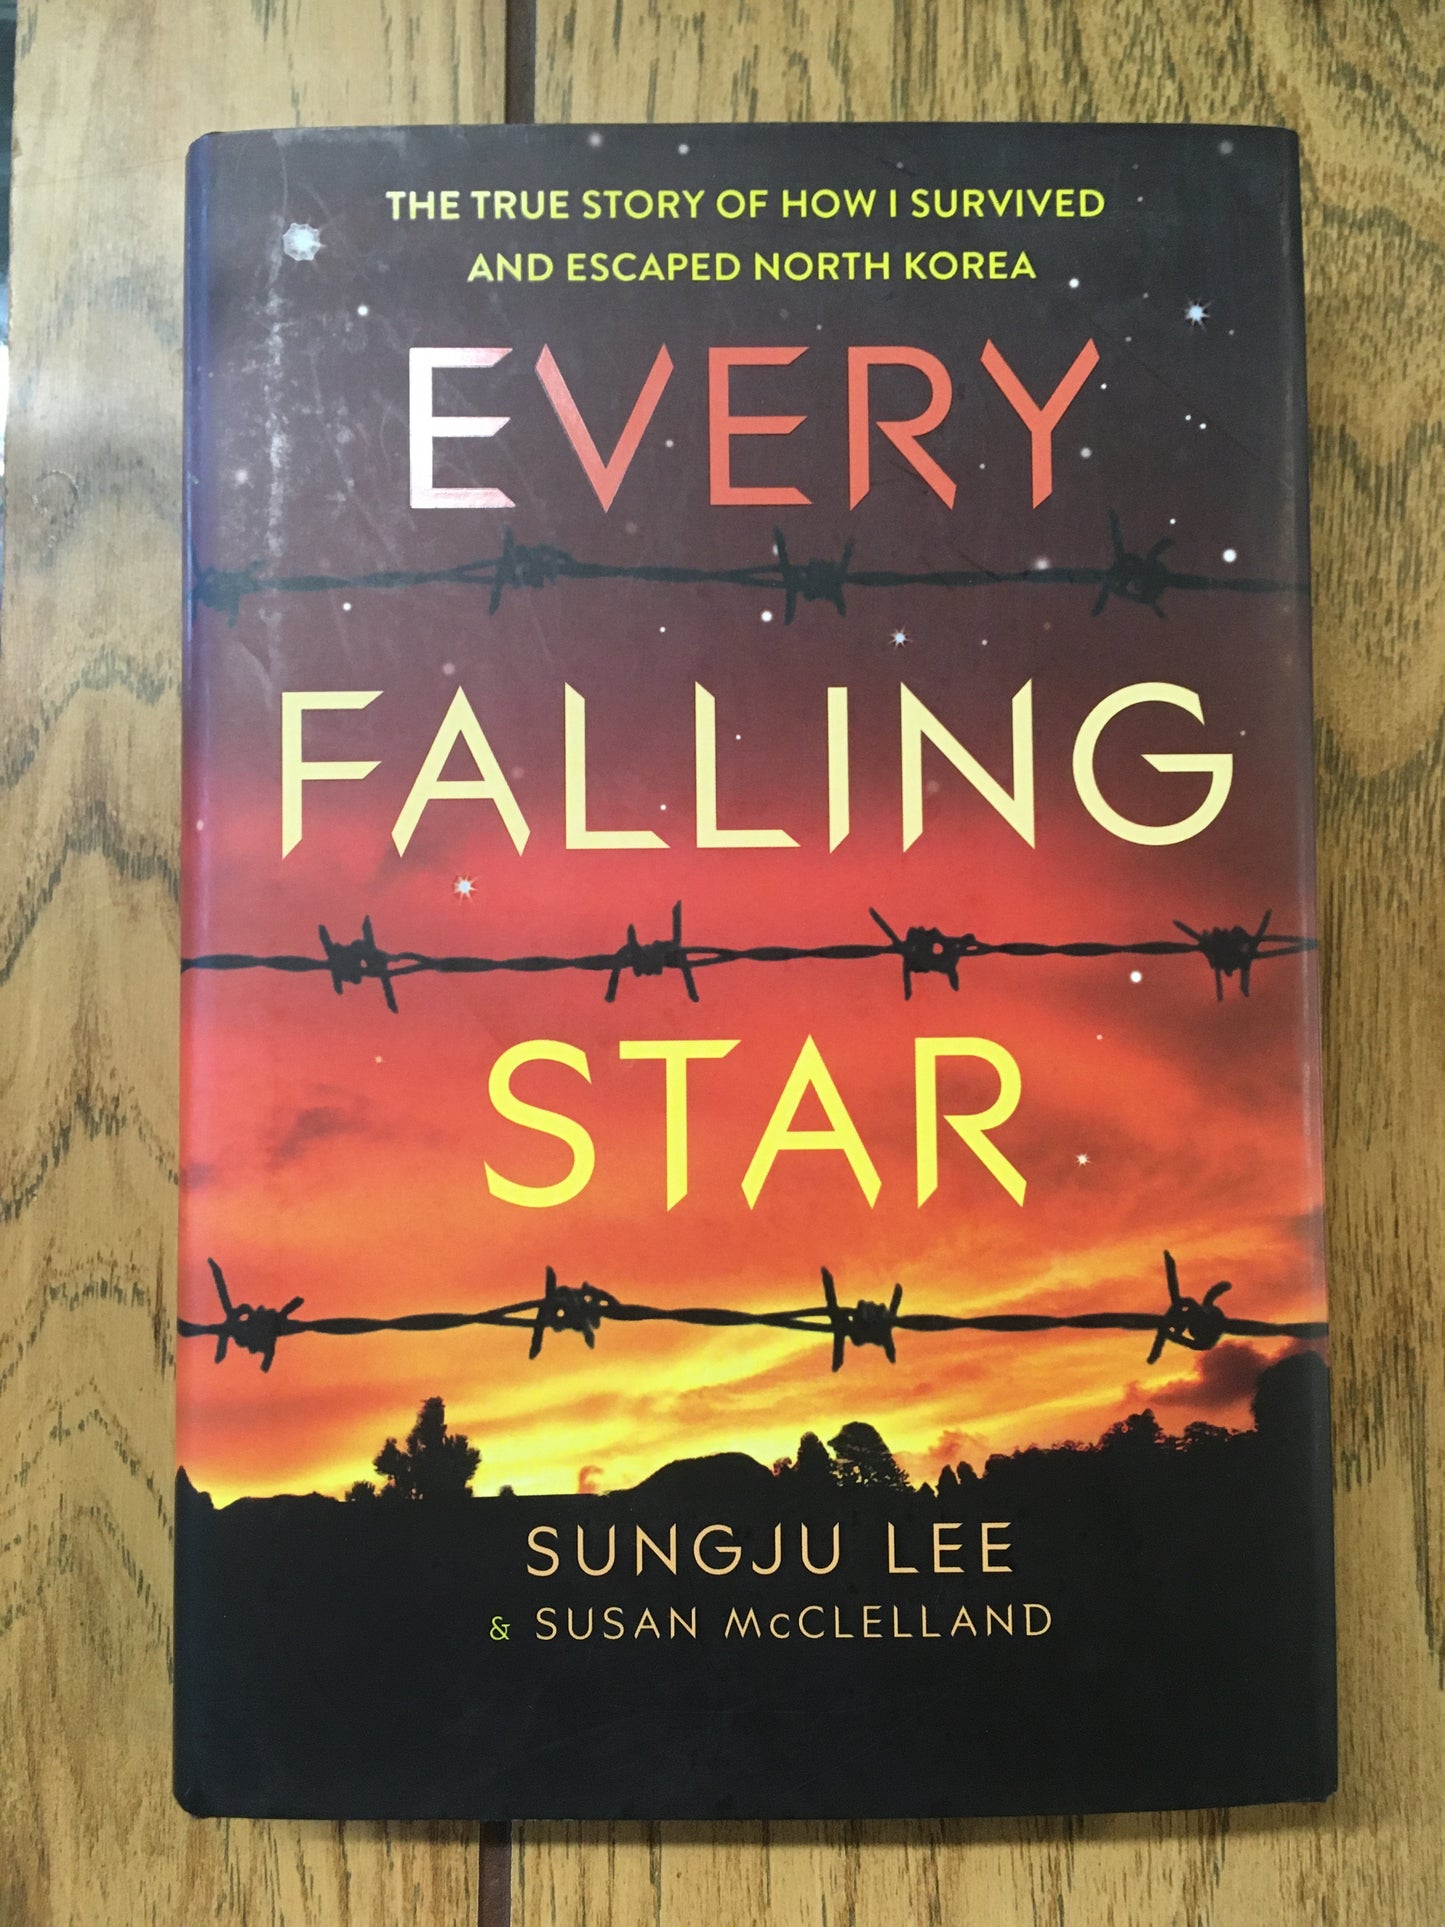 Every Falling Star: The True Story of How I Survived and Escaped North Korea